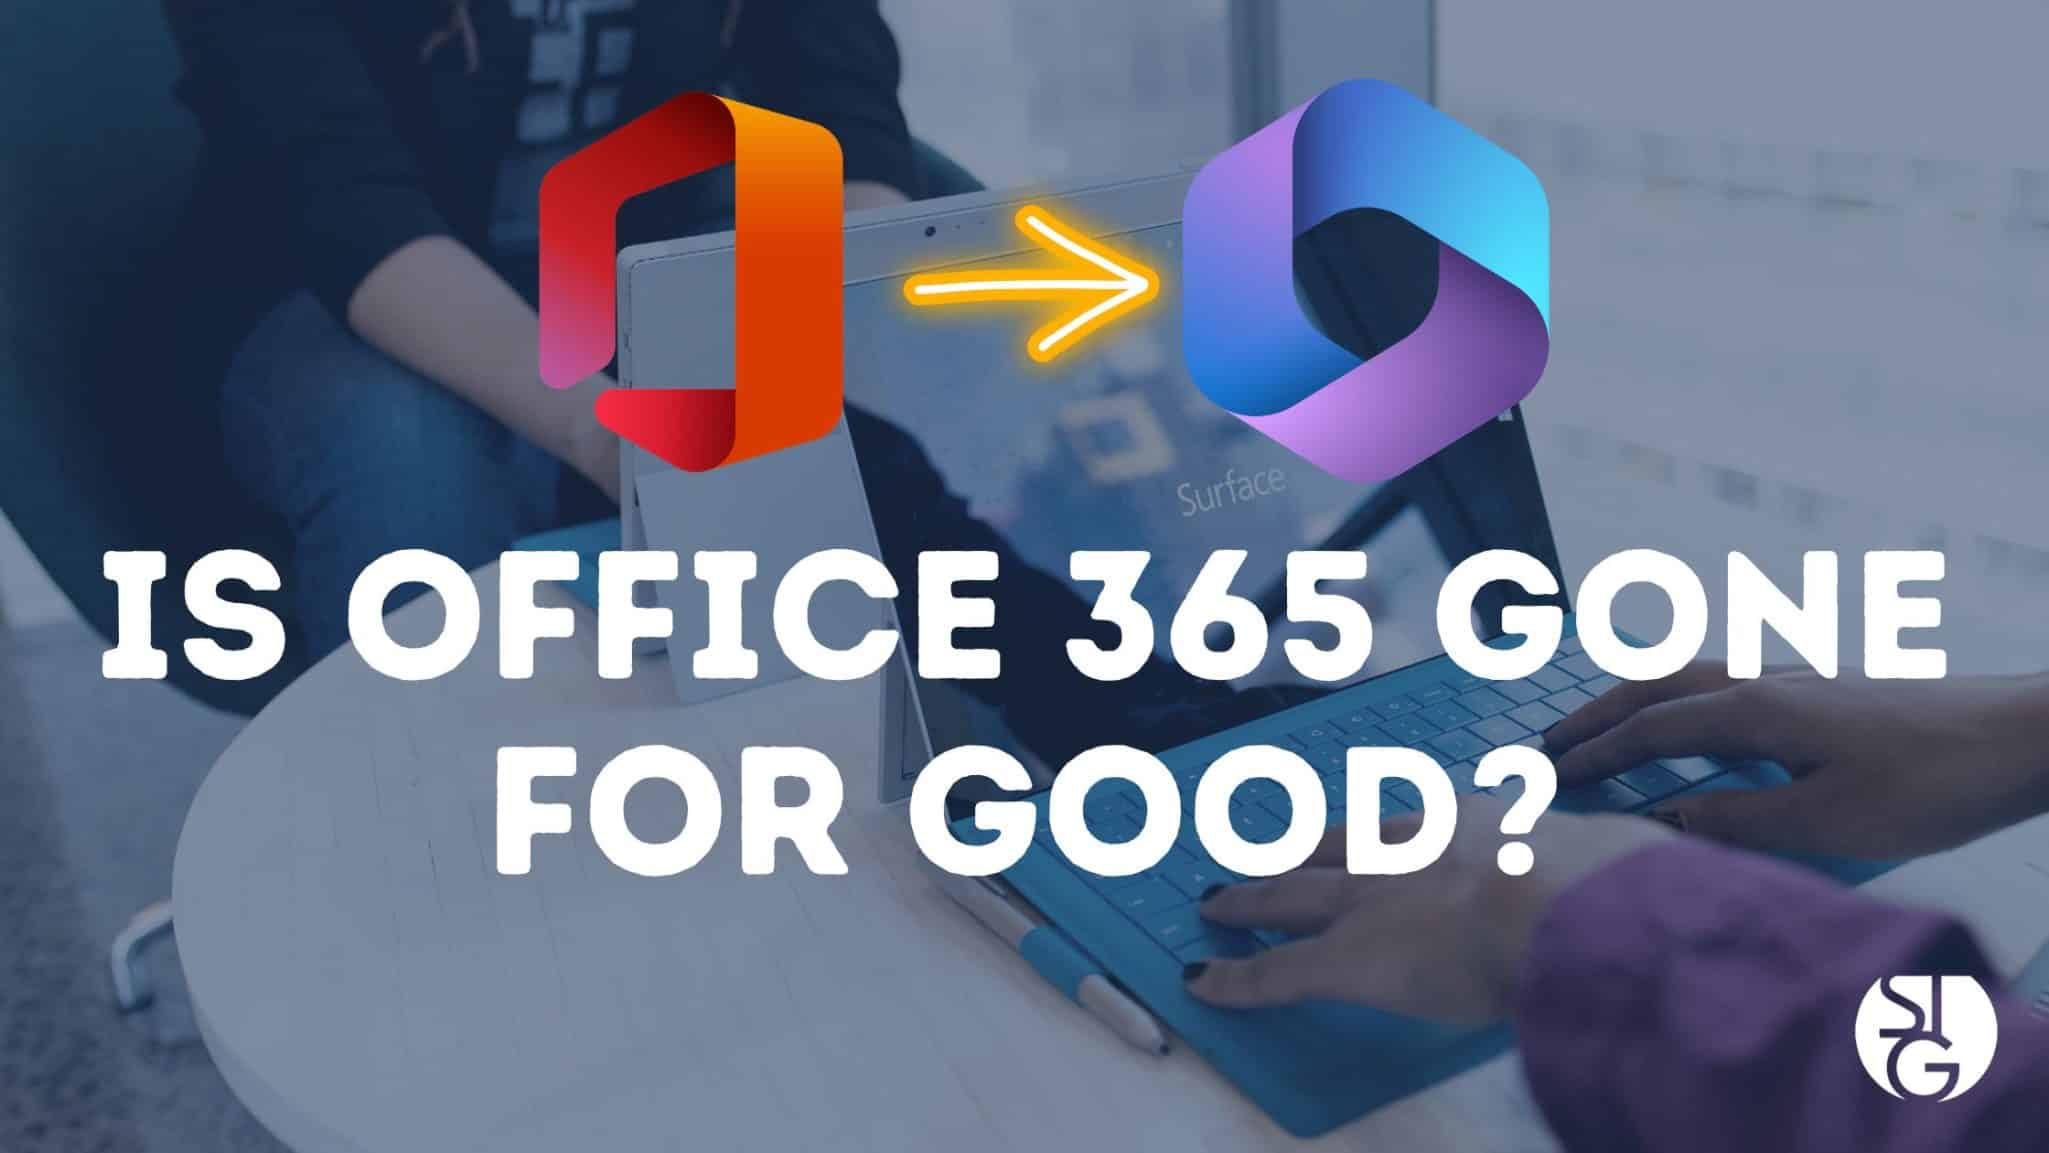 Microsoft Getting Rid of Office 365 for Good